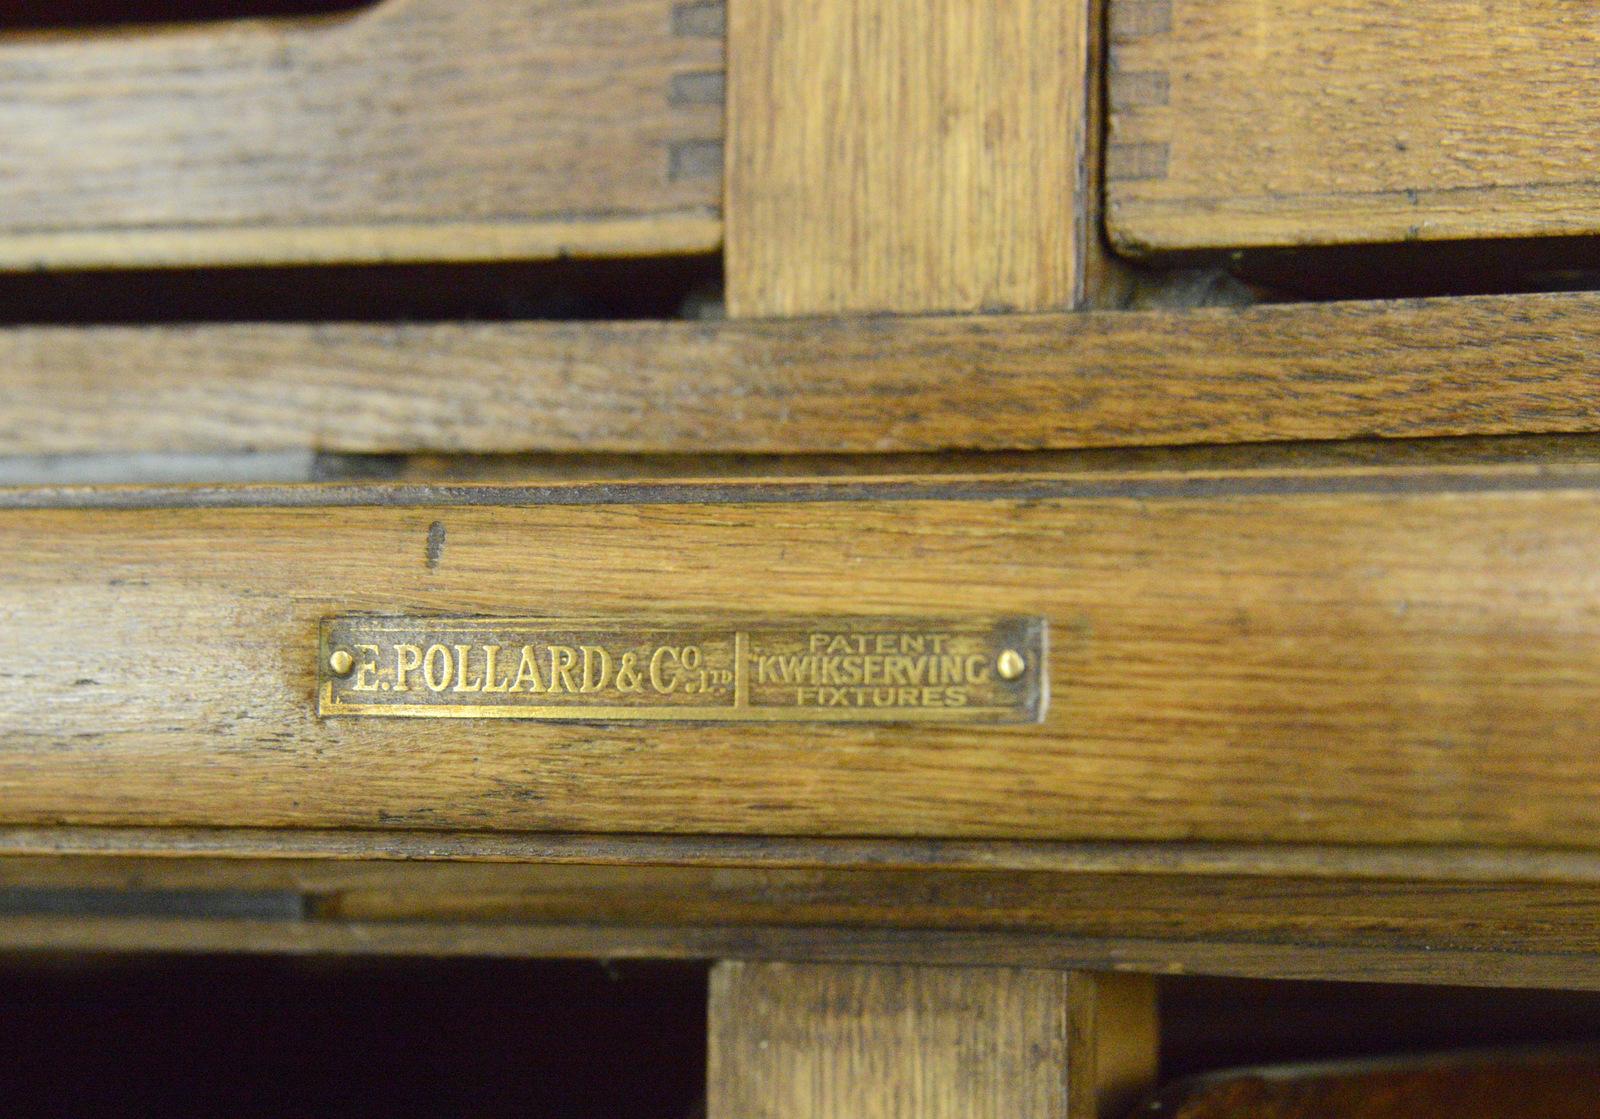 Haberdashery cabinet by E Pollard & Co, circa 1910

- Solid oak throughout
- Detailed carved edging
- Paneled sides
- 32 pullout / pull-out drawers
- Original brass makers badge
- Originally commissioned for the Croydon Co-op department